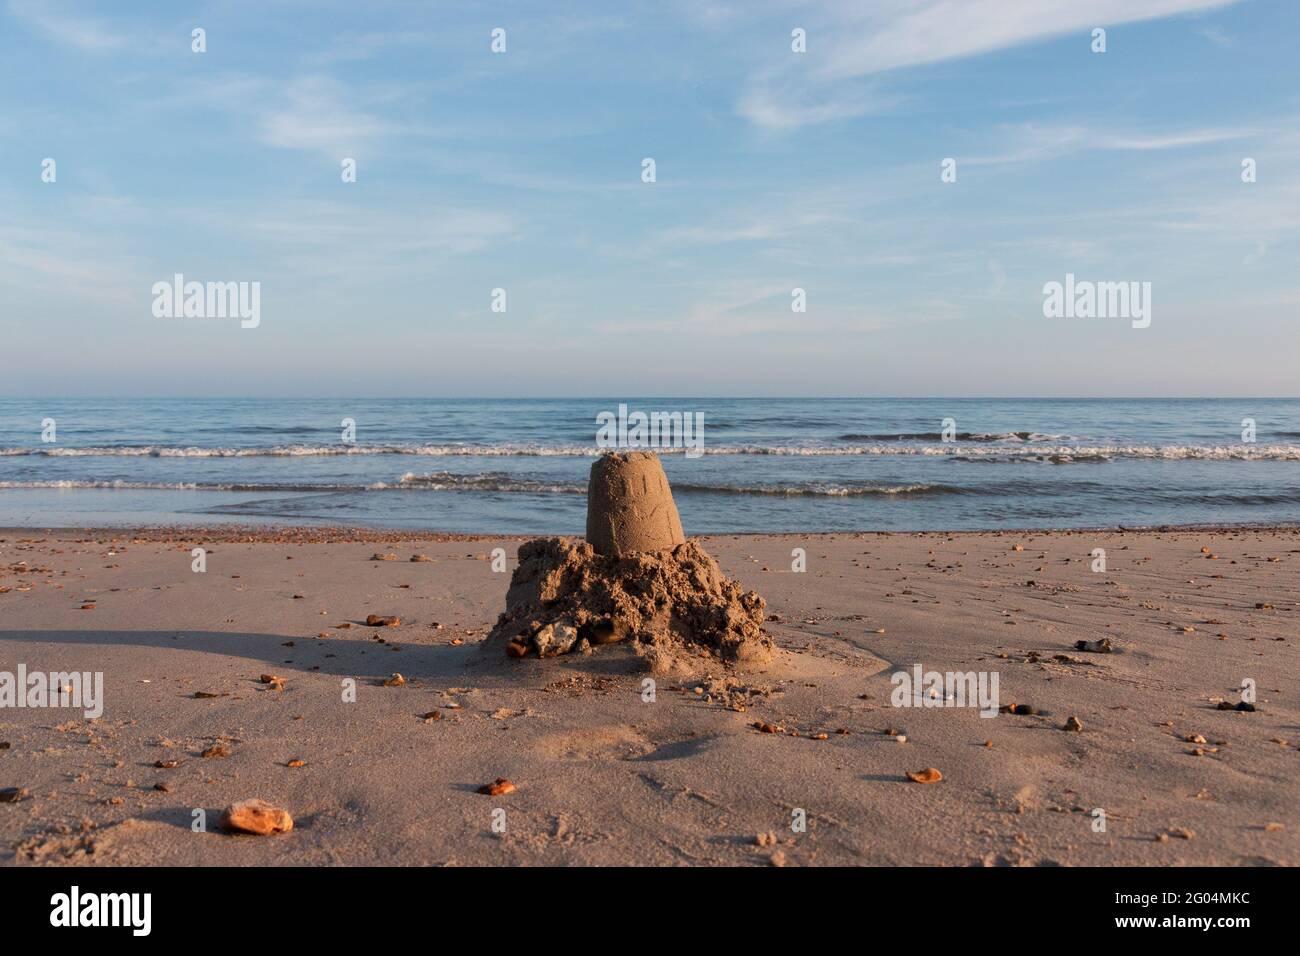 Sandcastles on Highcliffe Beach on the hotttest bank holiday weekend of the year near Bournemouth, England. Stock Photo